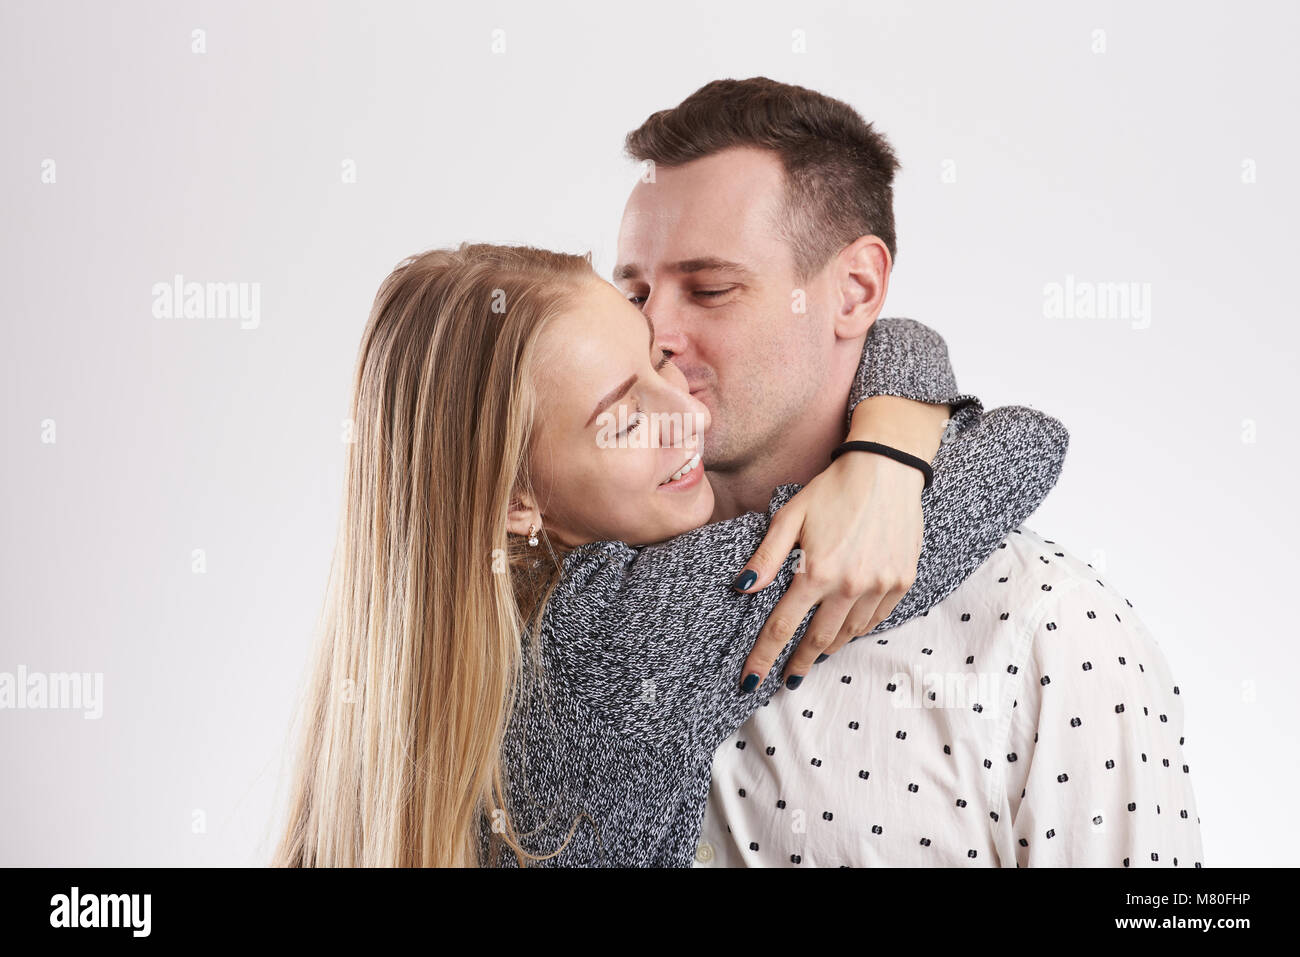 Young man kissing blonde woman isolated on white background Stock Photo